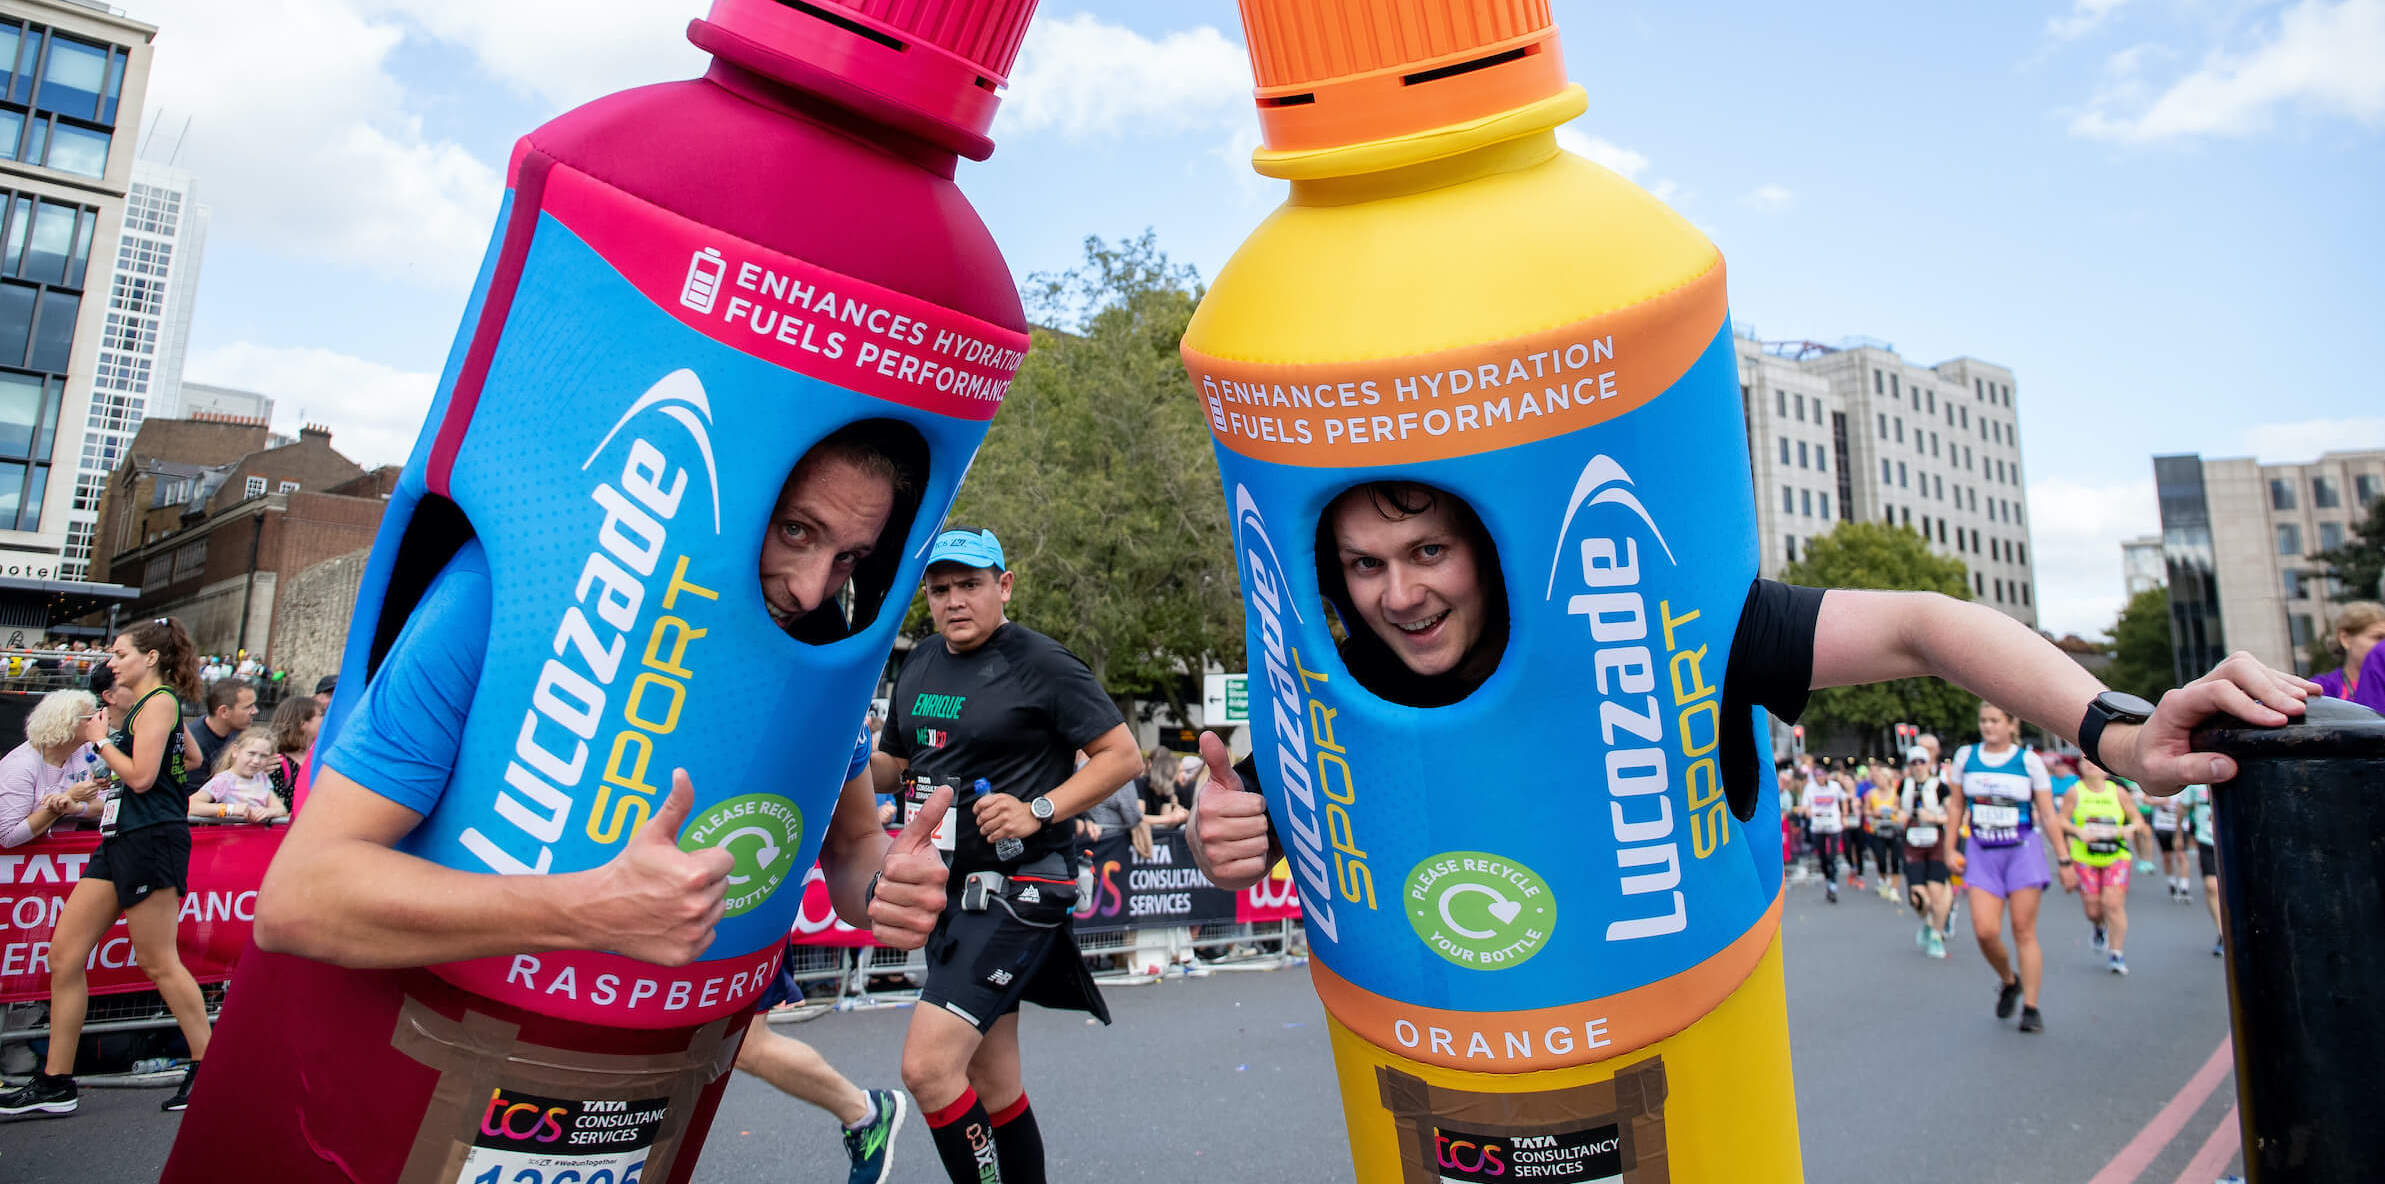 Two participants dressed as Lucozade Sport bottles at the TCS London Marathon